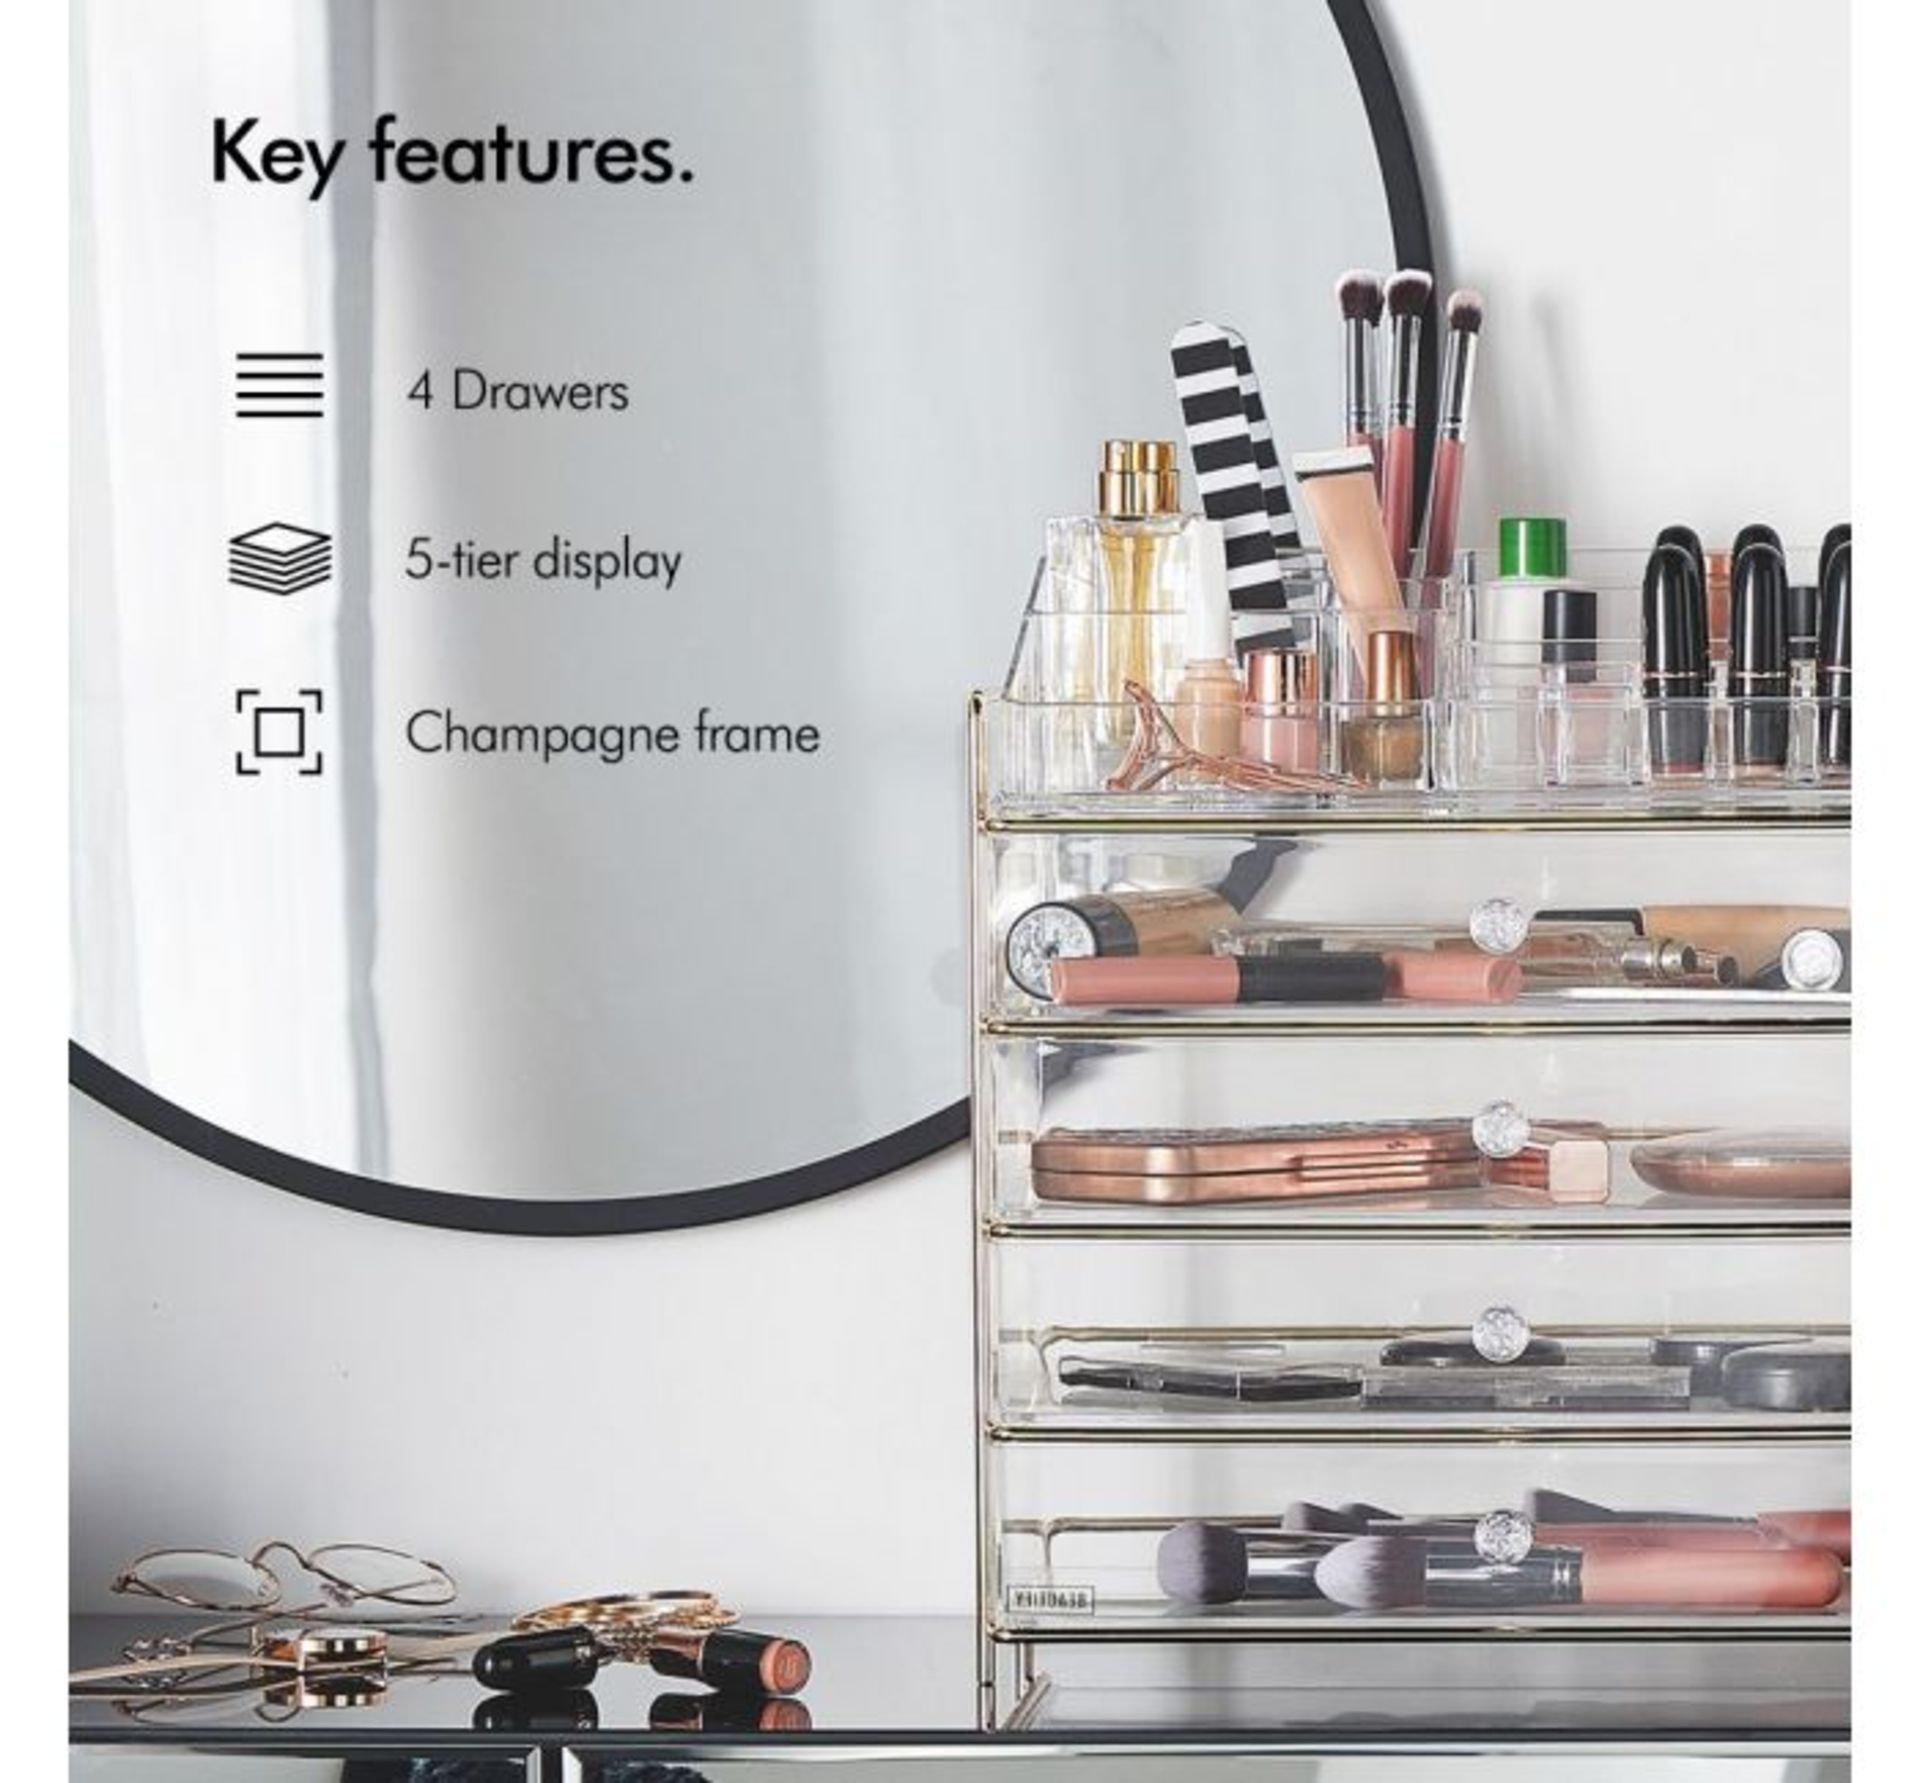 (OM40) 5 Tier Cosmetic Organiser The 5 tier display features 4 large removable drawers with ... - Image 3 of 3